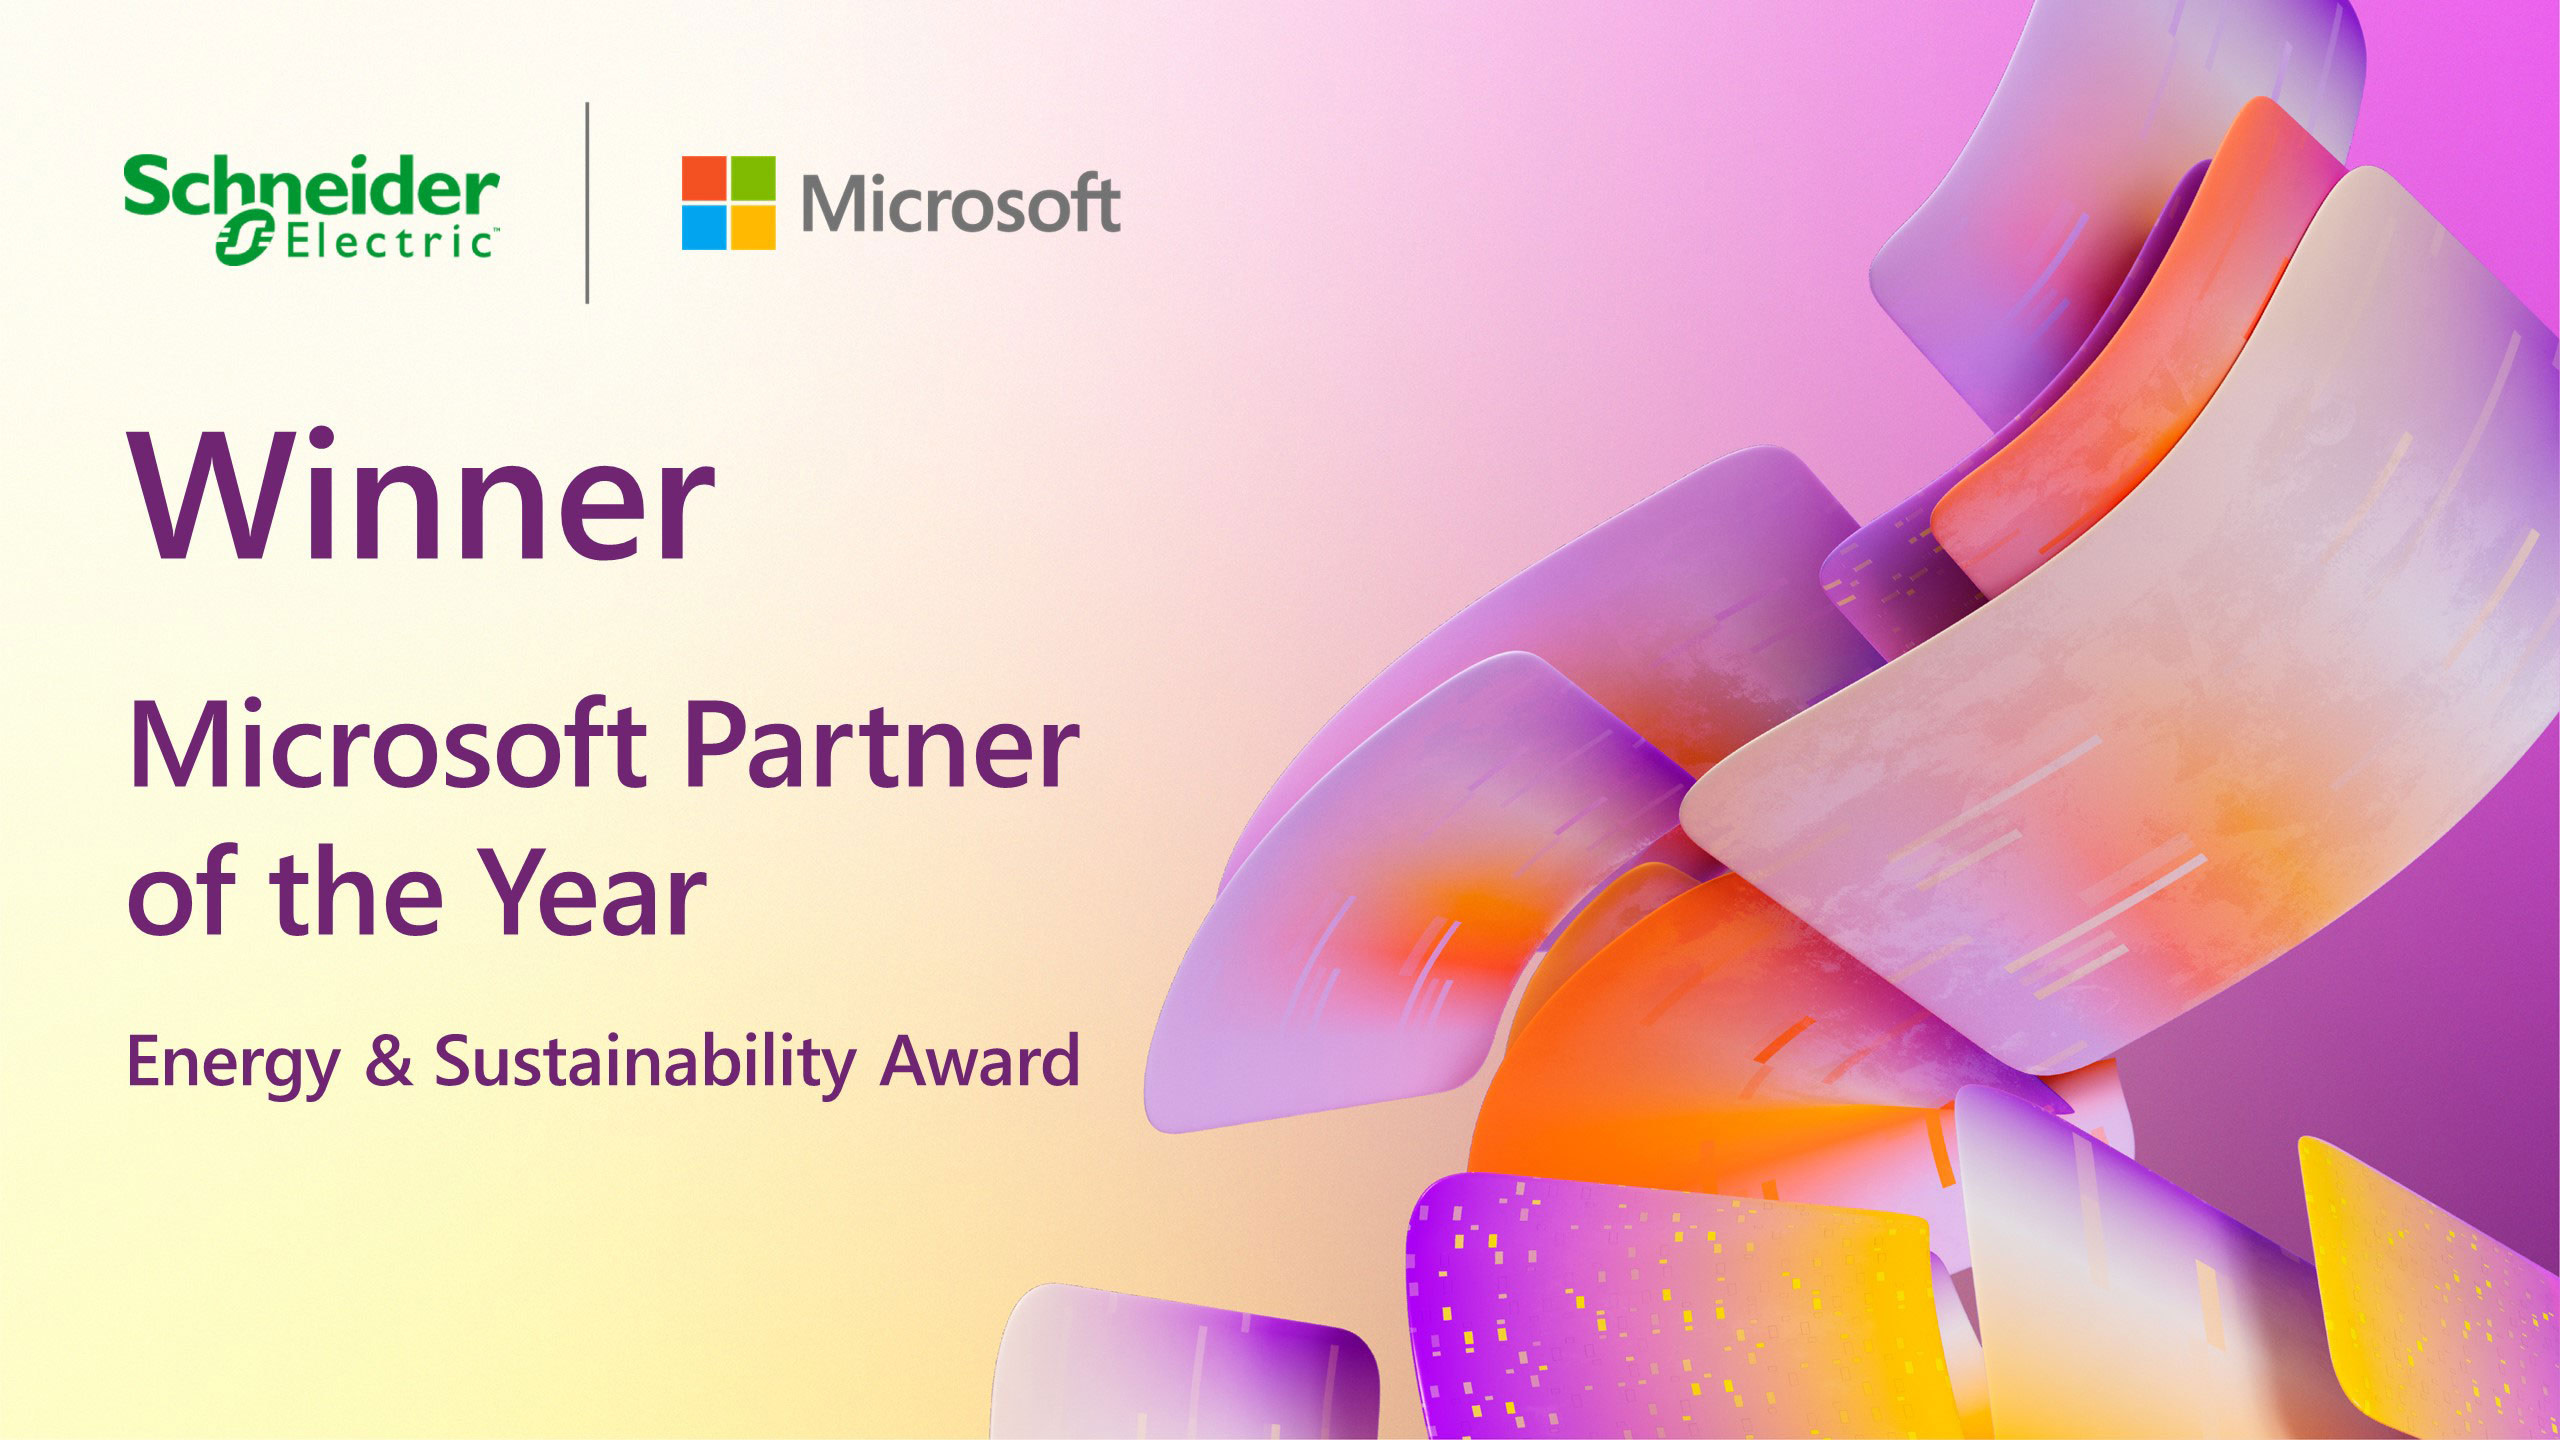 Schneider Electric has been named the Microsoft Energy & Sustainability Partner of the Year for 2022